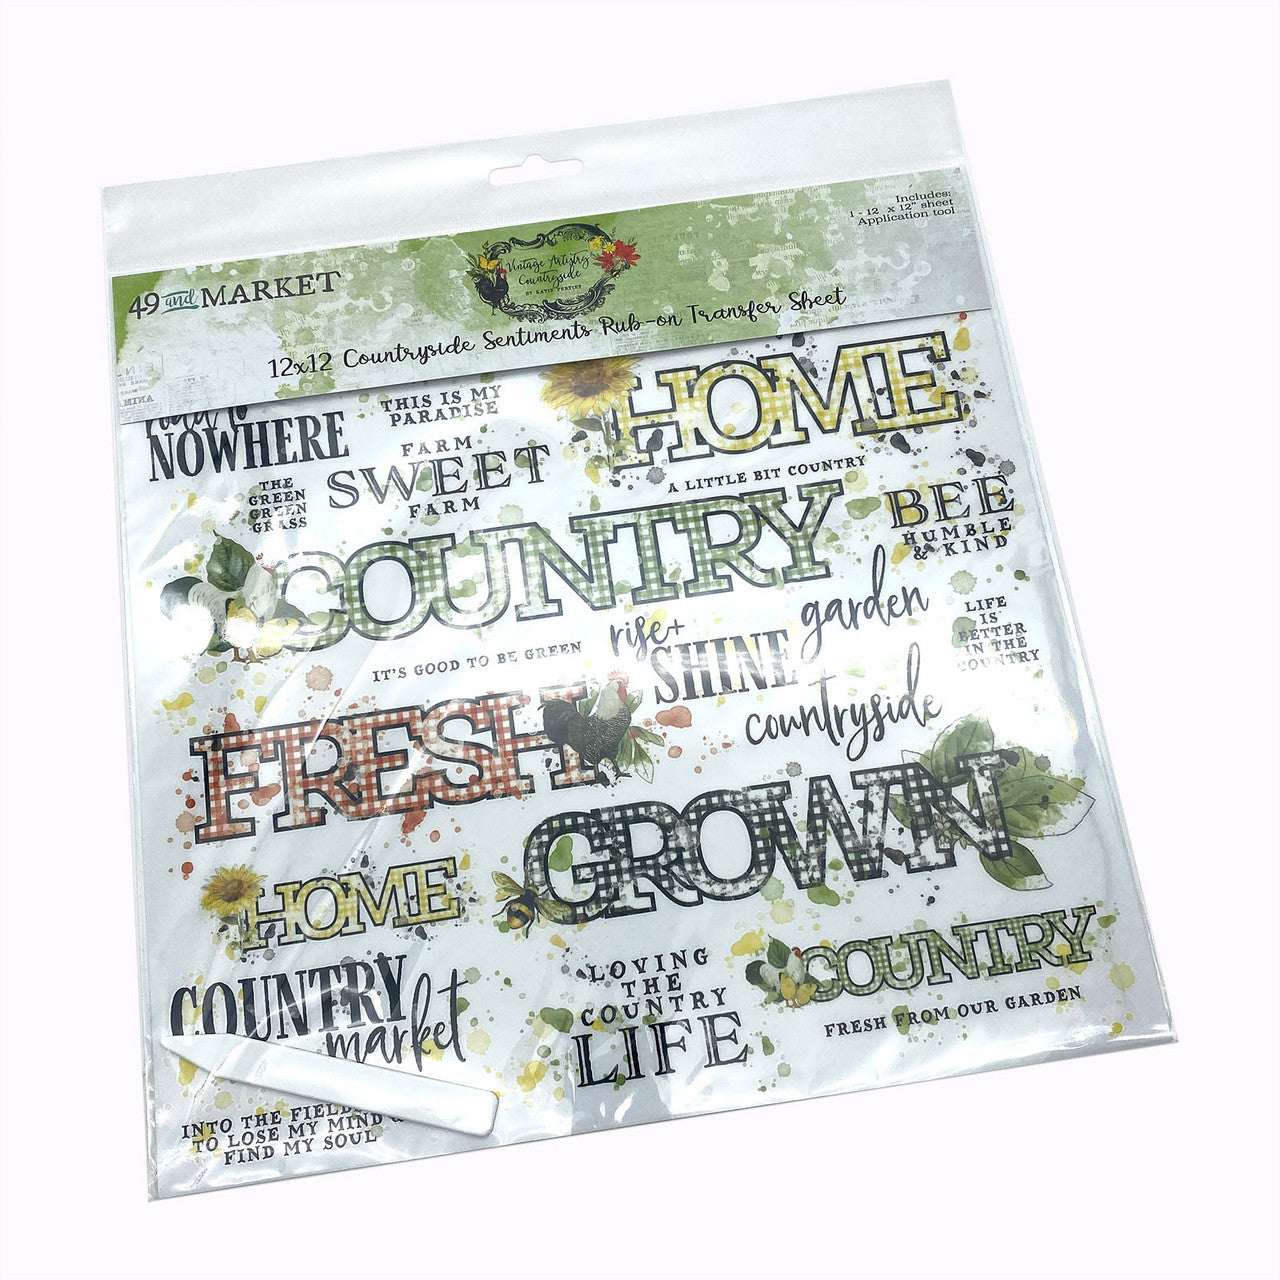 49 and Market Vintage Artistry Countryside Sentiments 12 x 12 Hoja de transferencia para frotar